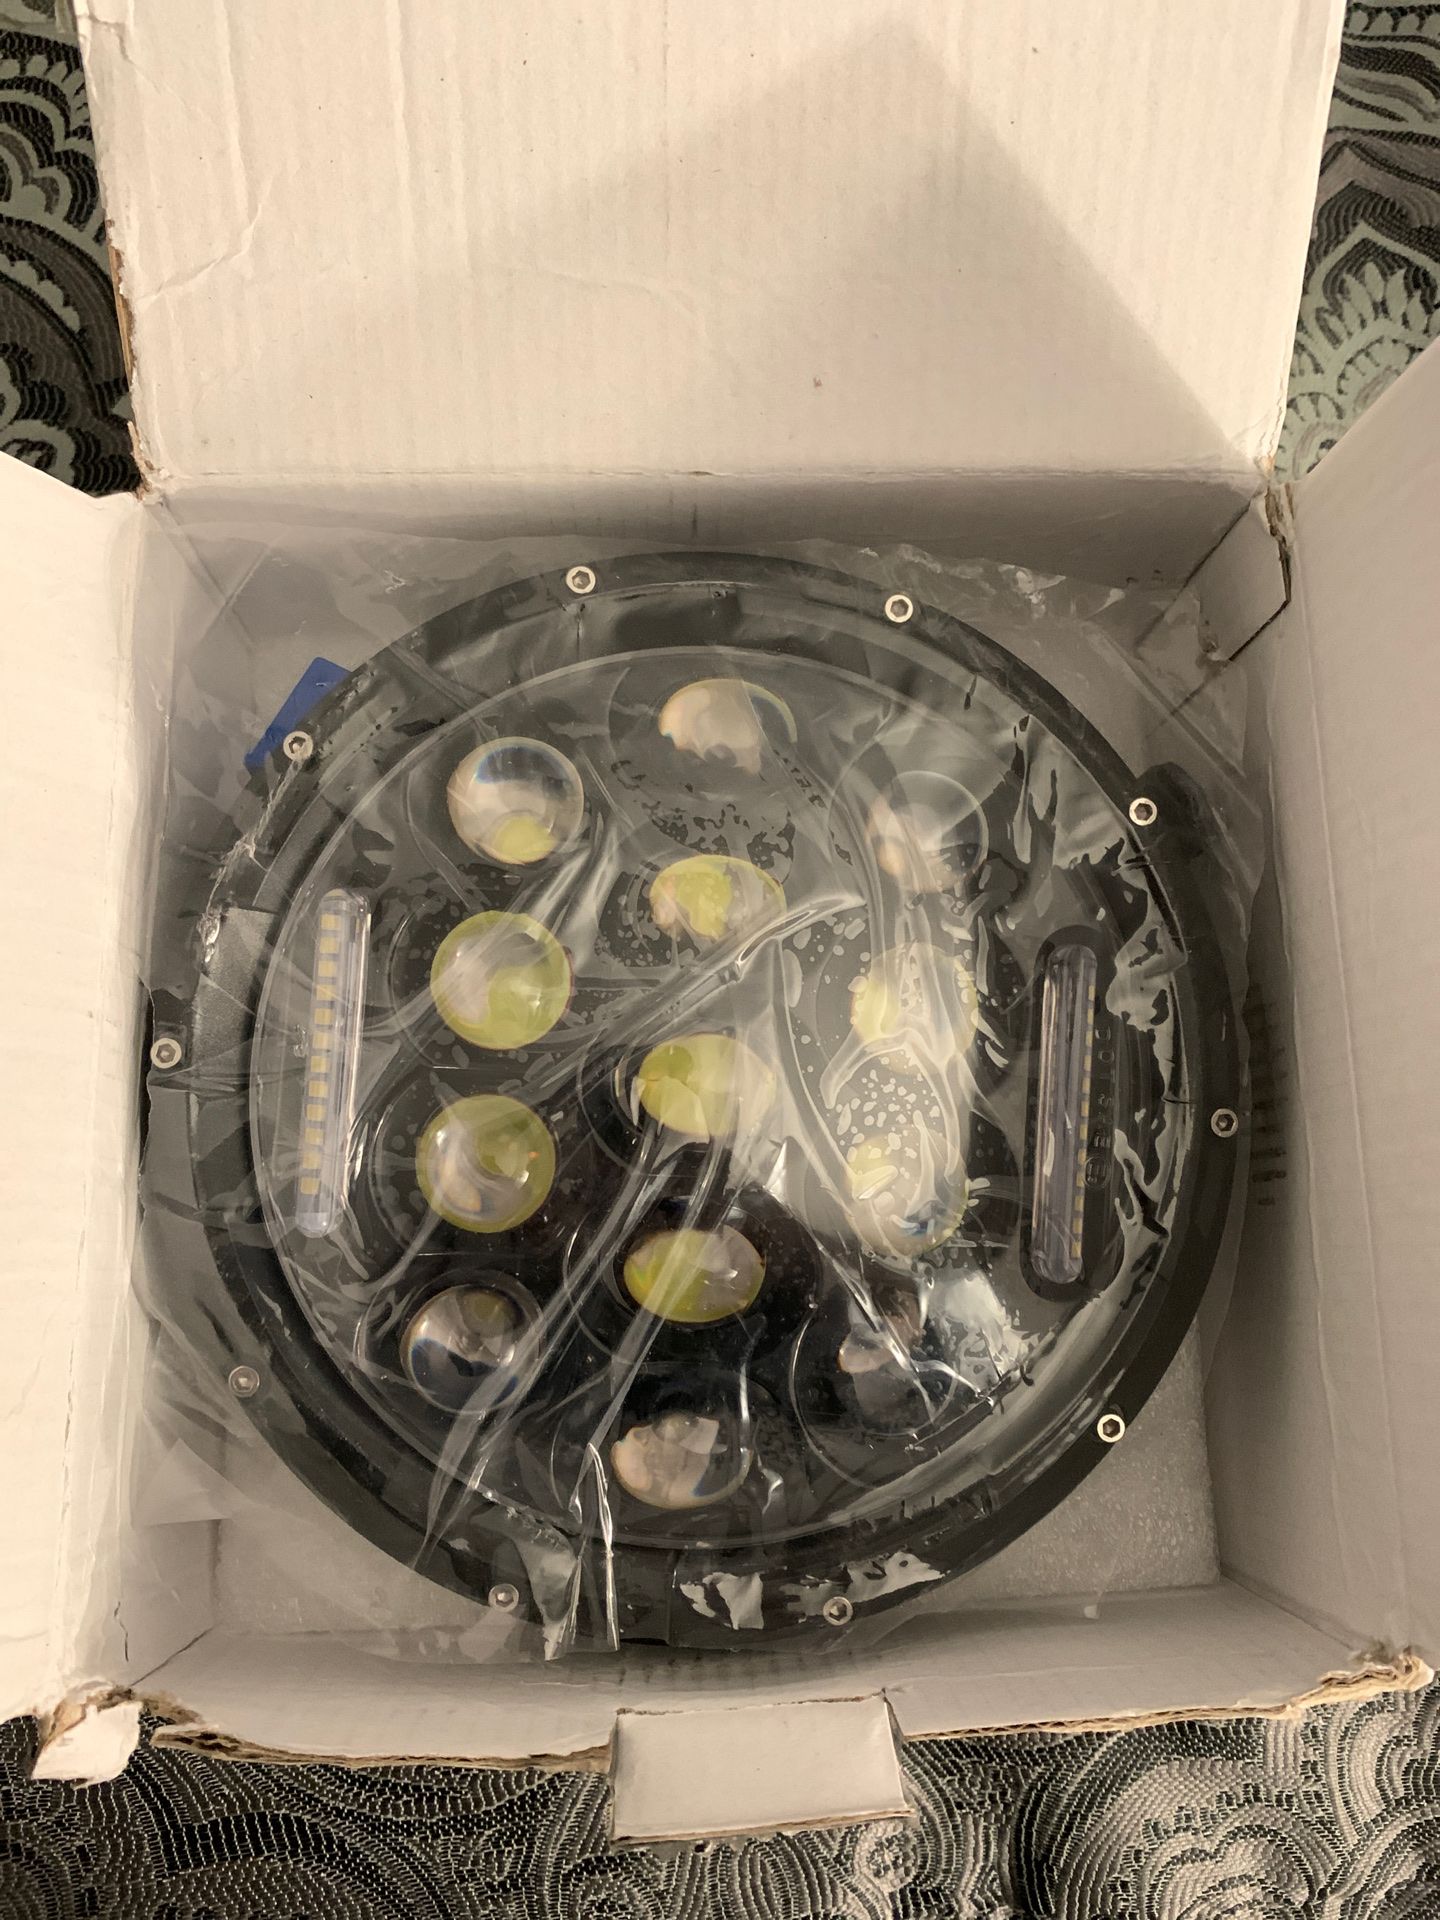 Brand new motorcycle Headlight 7” universal fits all bikes Harley,Indian,Suzuki,Yamaha,etc never used still in box lug and play ready to got